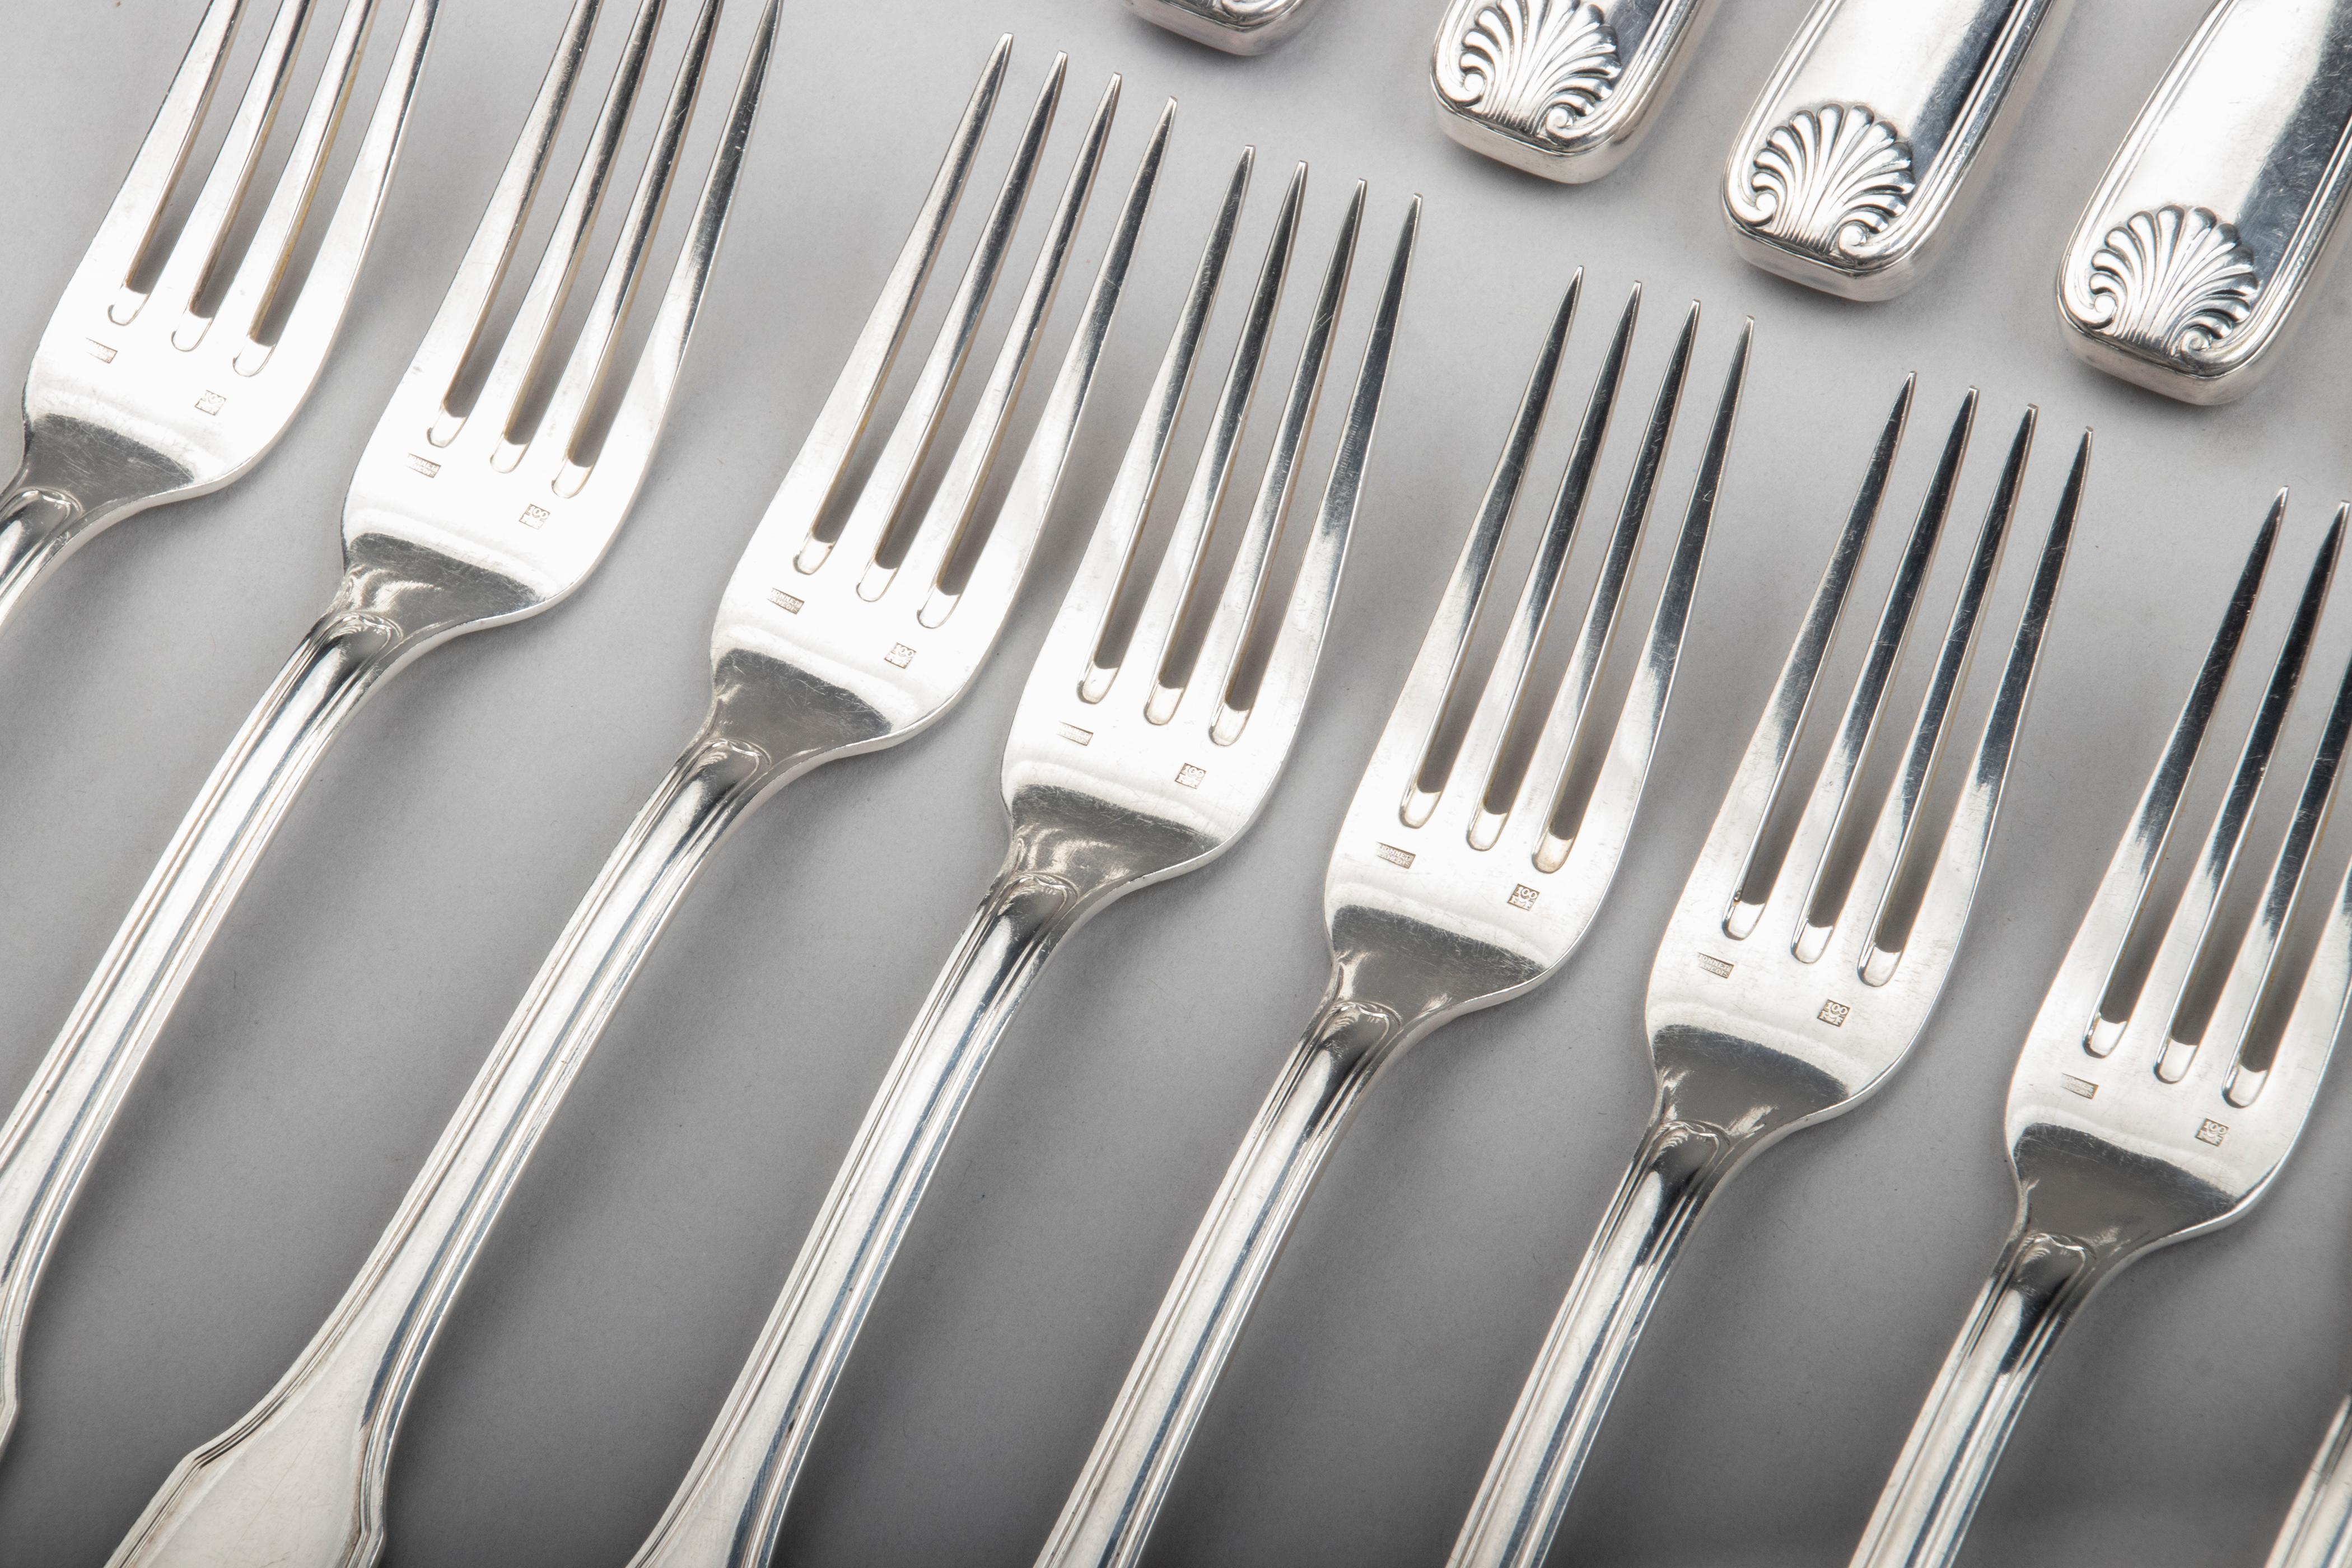 74-Piece set of Silver Plated Flatware by François Frionnet model Coquille 8